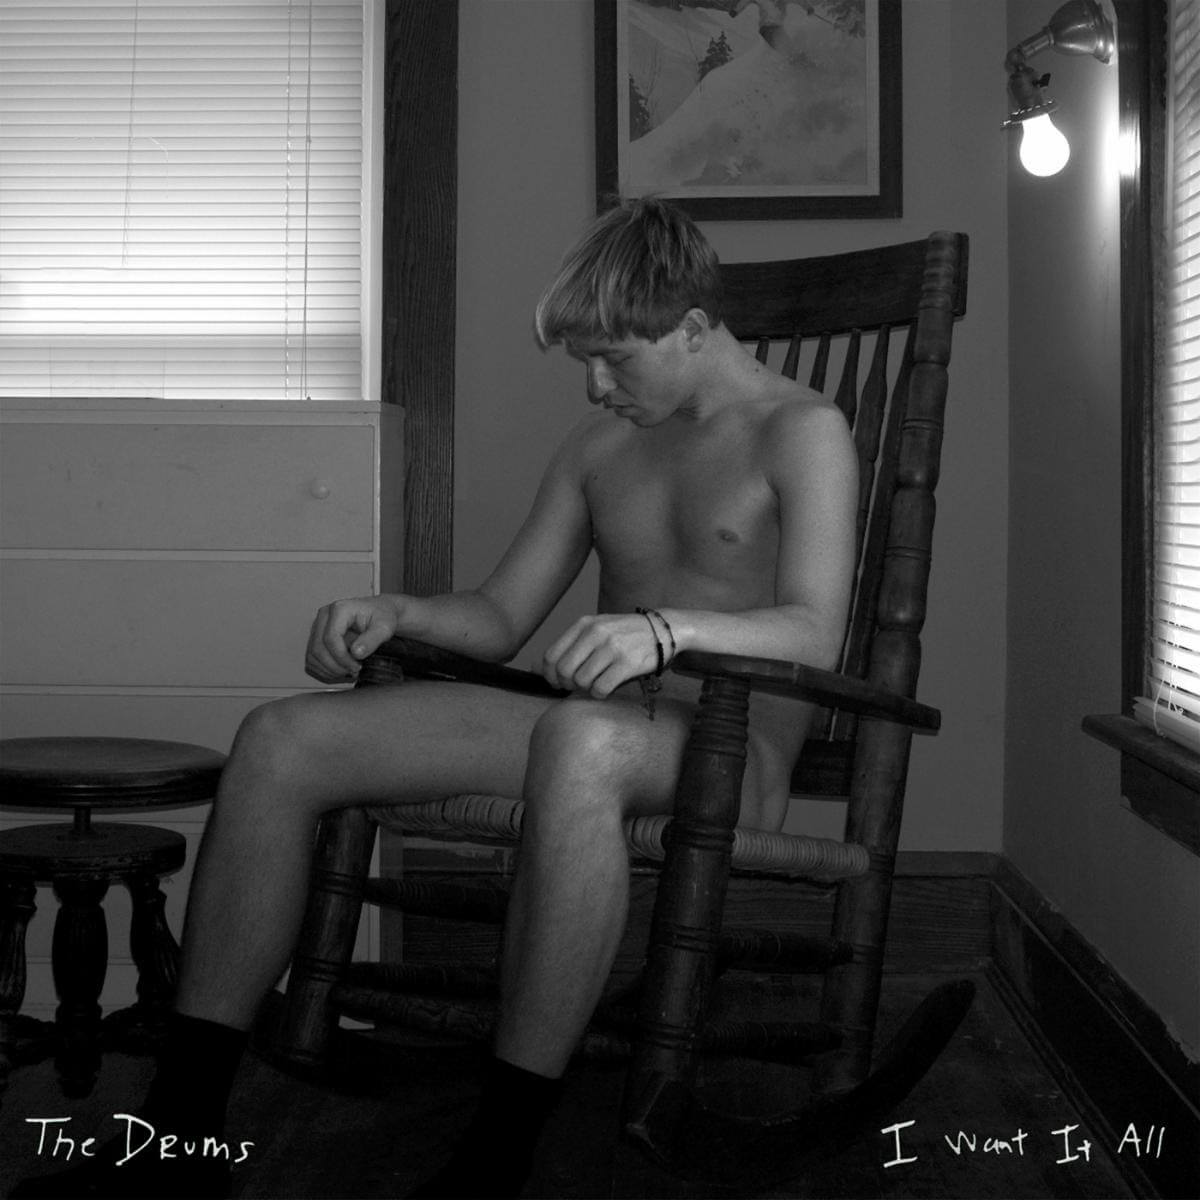 The Drums have returned with “I Want It All,” the new single is out today via ANTI-. The track confronts childhood trauma and self-acceptance